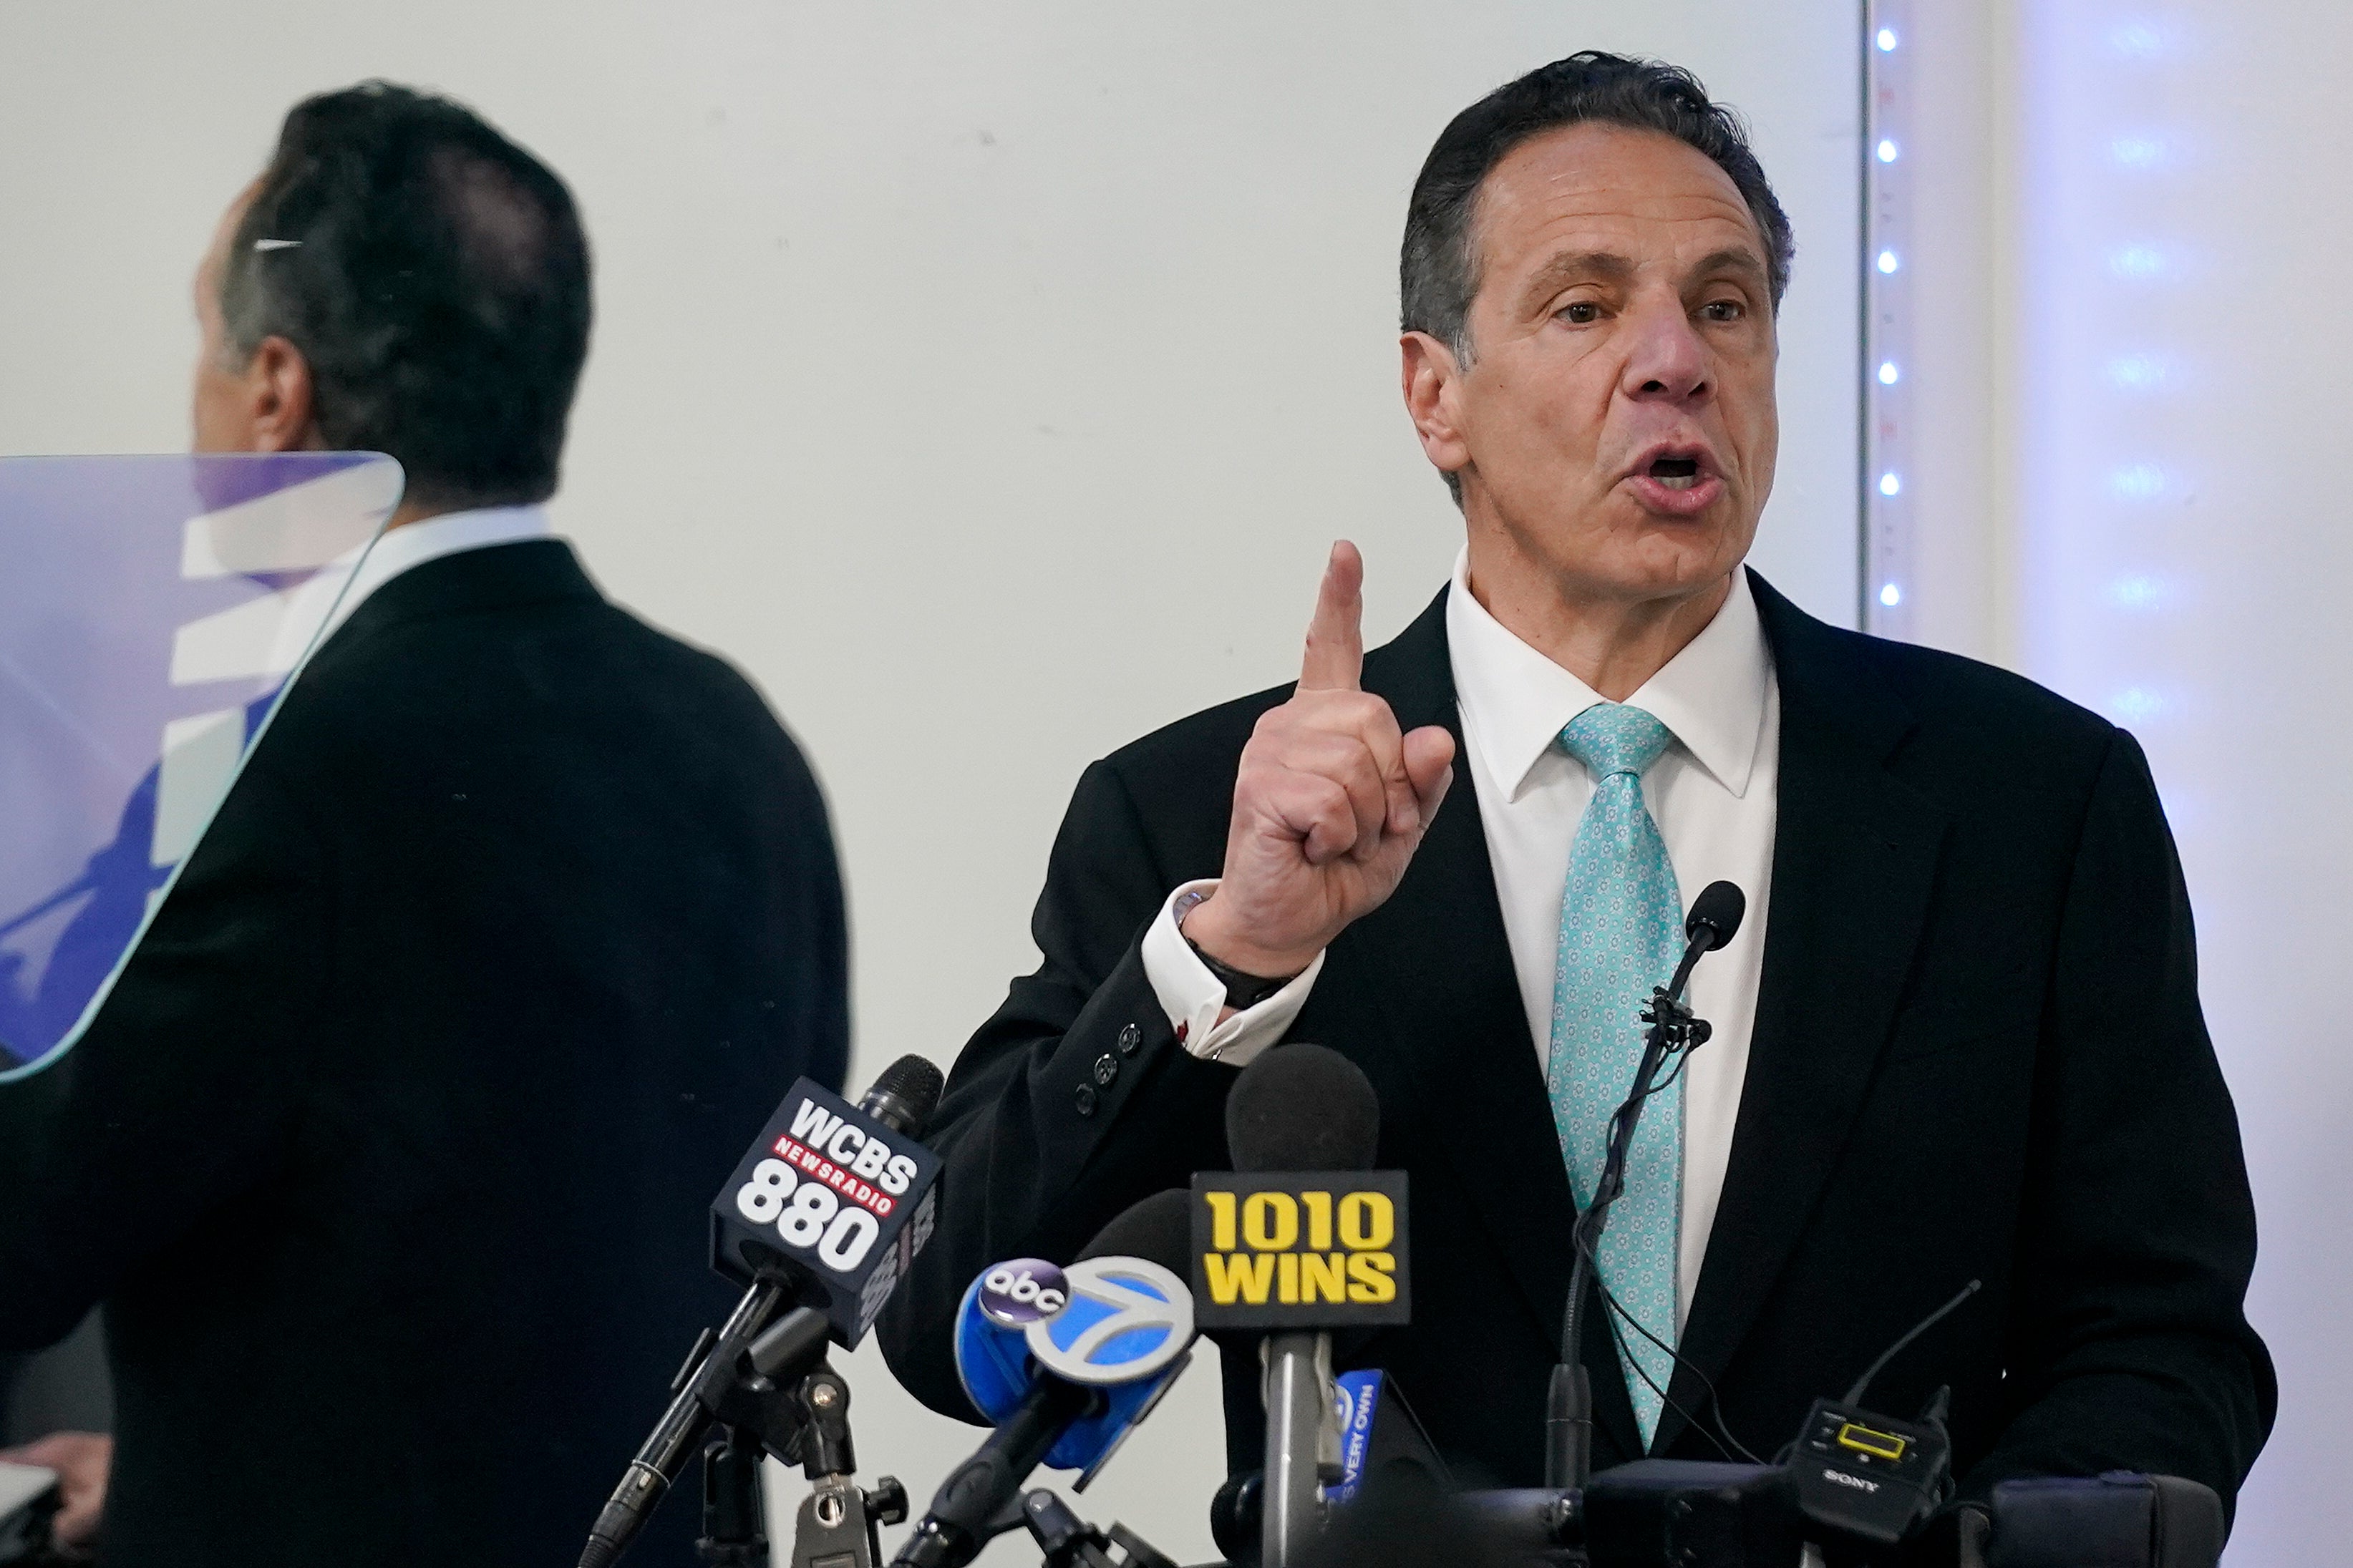 Former New York Governor Andrew Cuomo speaks during a New York Hispanic Clergy Organization event in March 2022